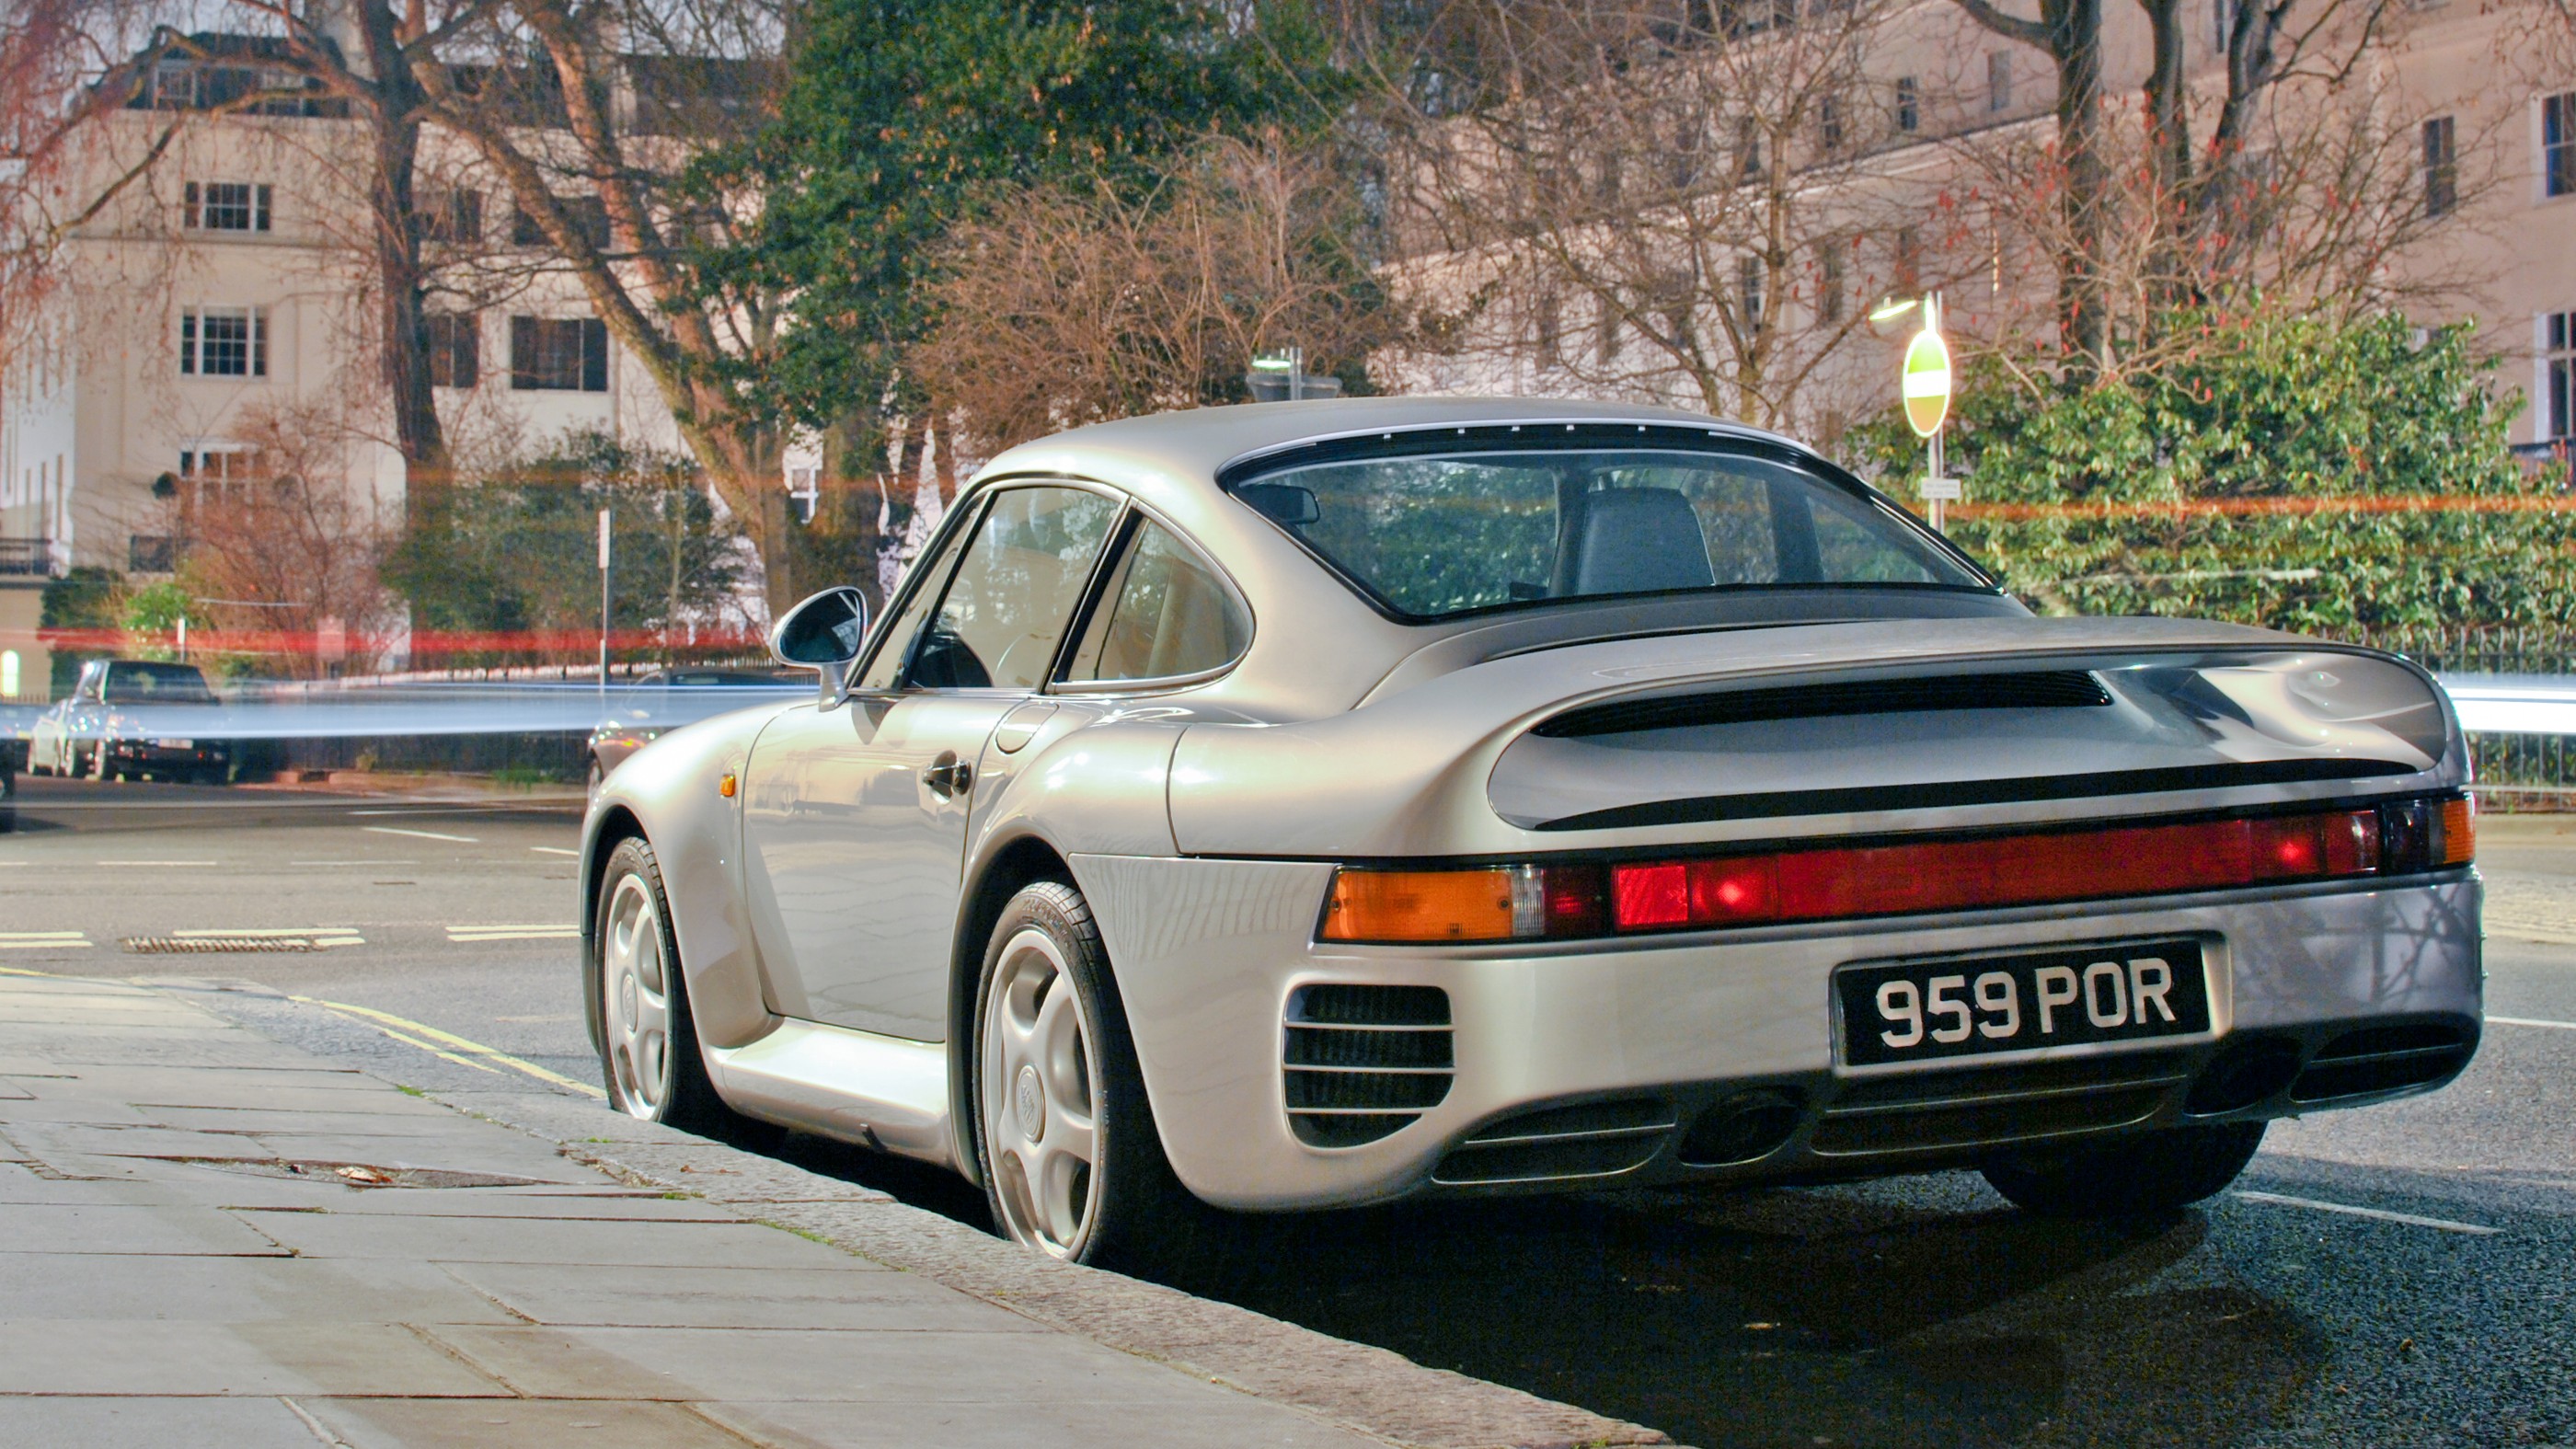 Porsche 959 14 Record-Setting Supercars That Made an Impression